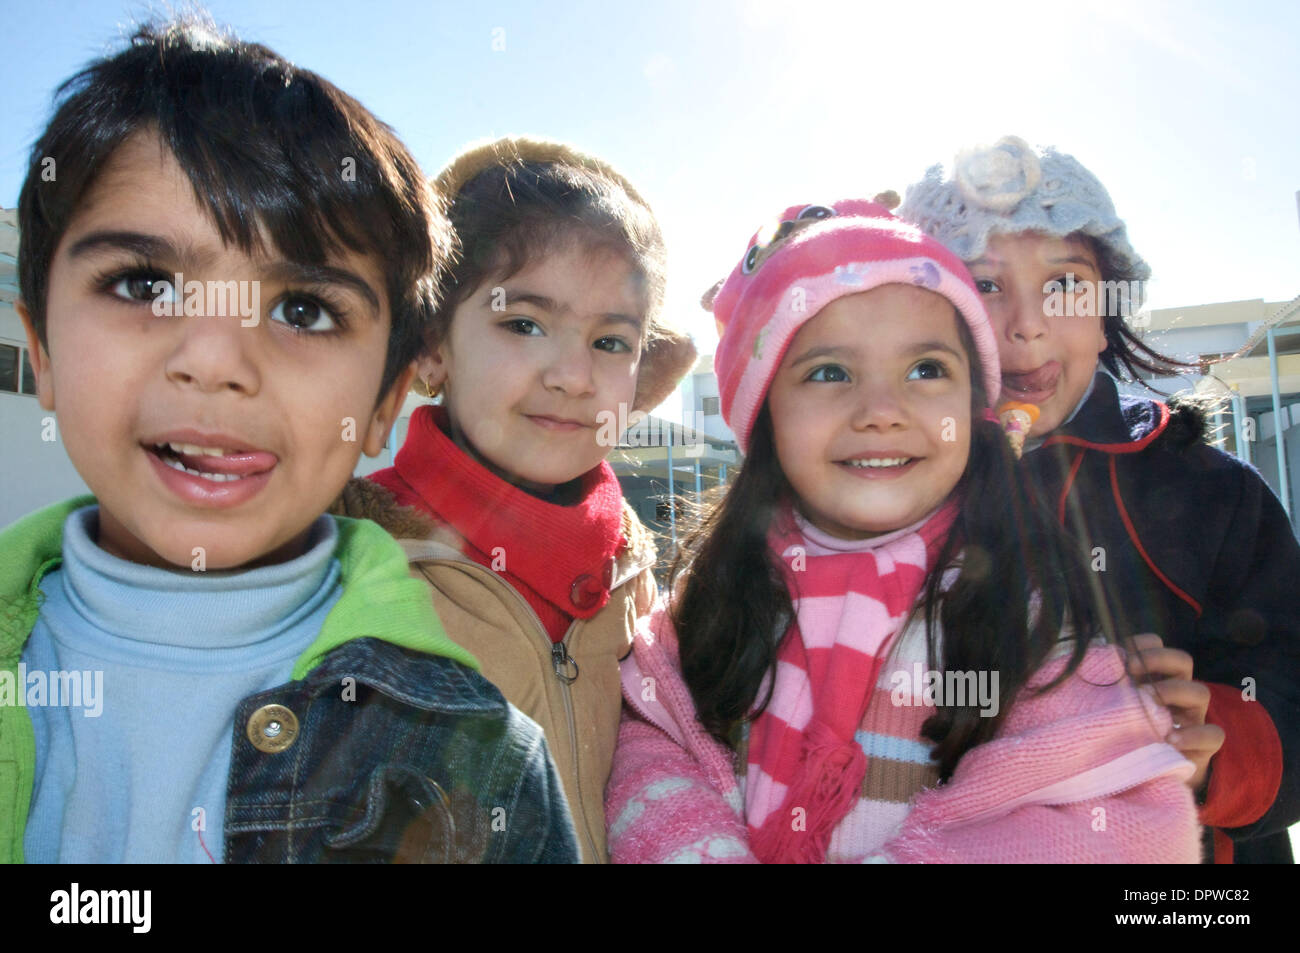 Jan 04, 2009 - Baghdad, Iraq - Children greet U.S. Army soldiers at a school in Baghdad while the soldiers were checking on the status of a school renovation which they are coordinating with Iraqi contractors. (Credit Image: © John Goodman/ZUMA Press) Stock Photo